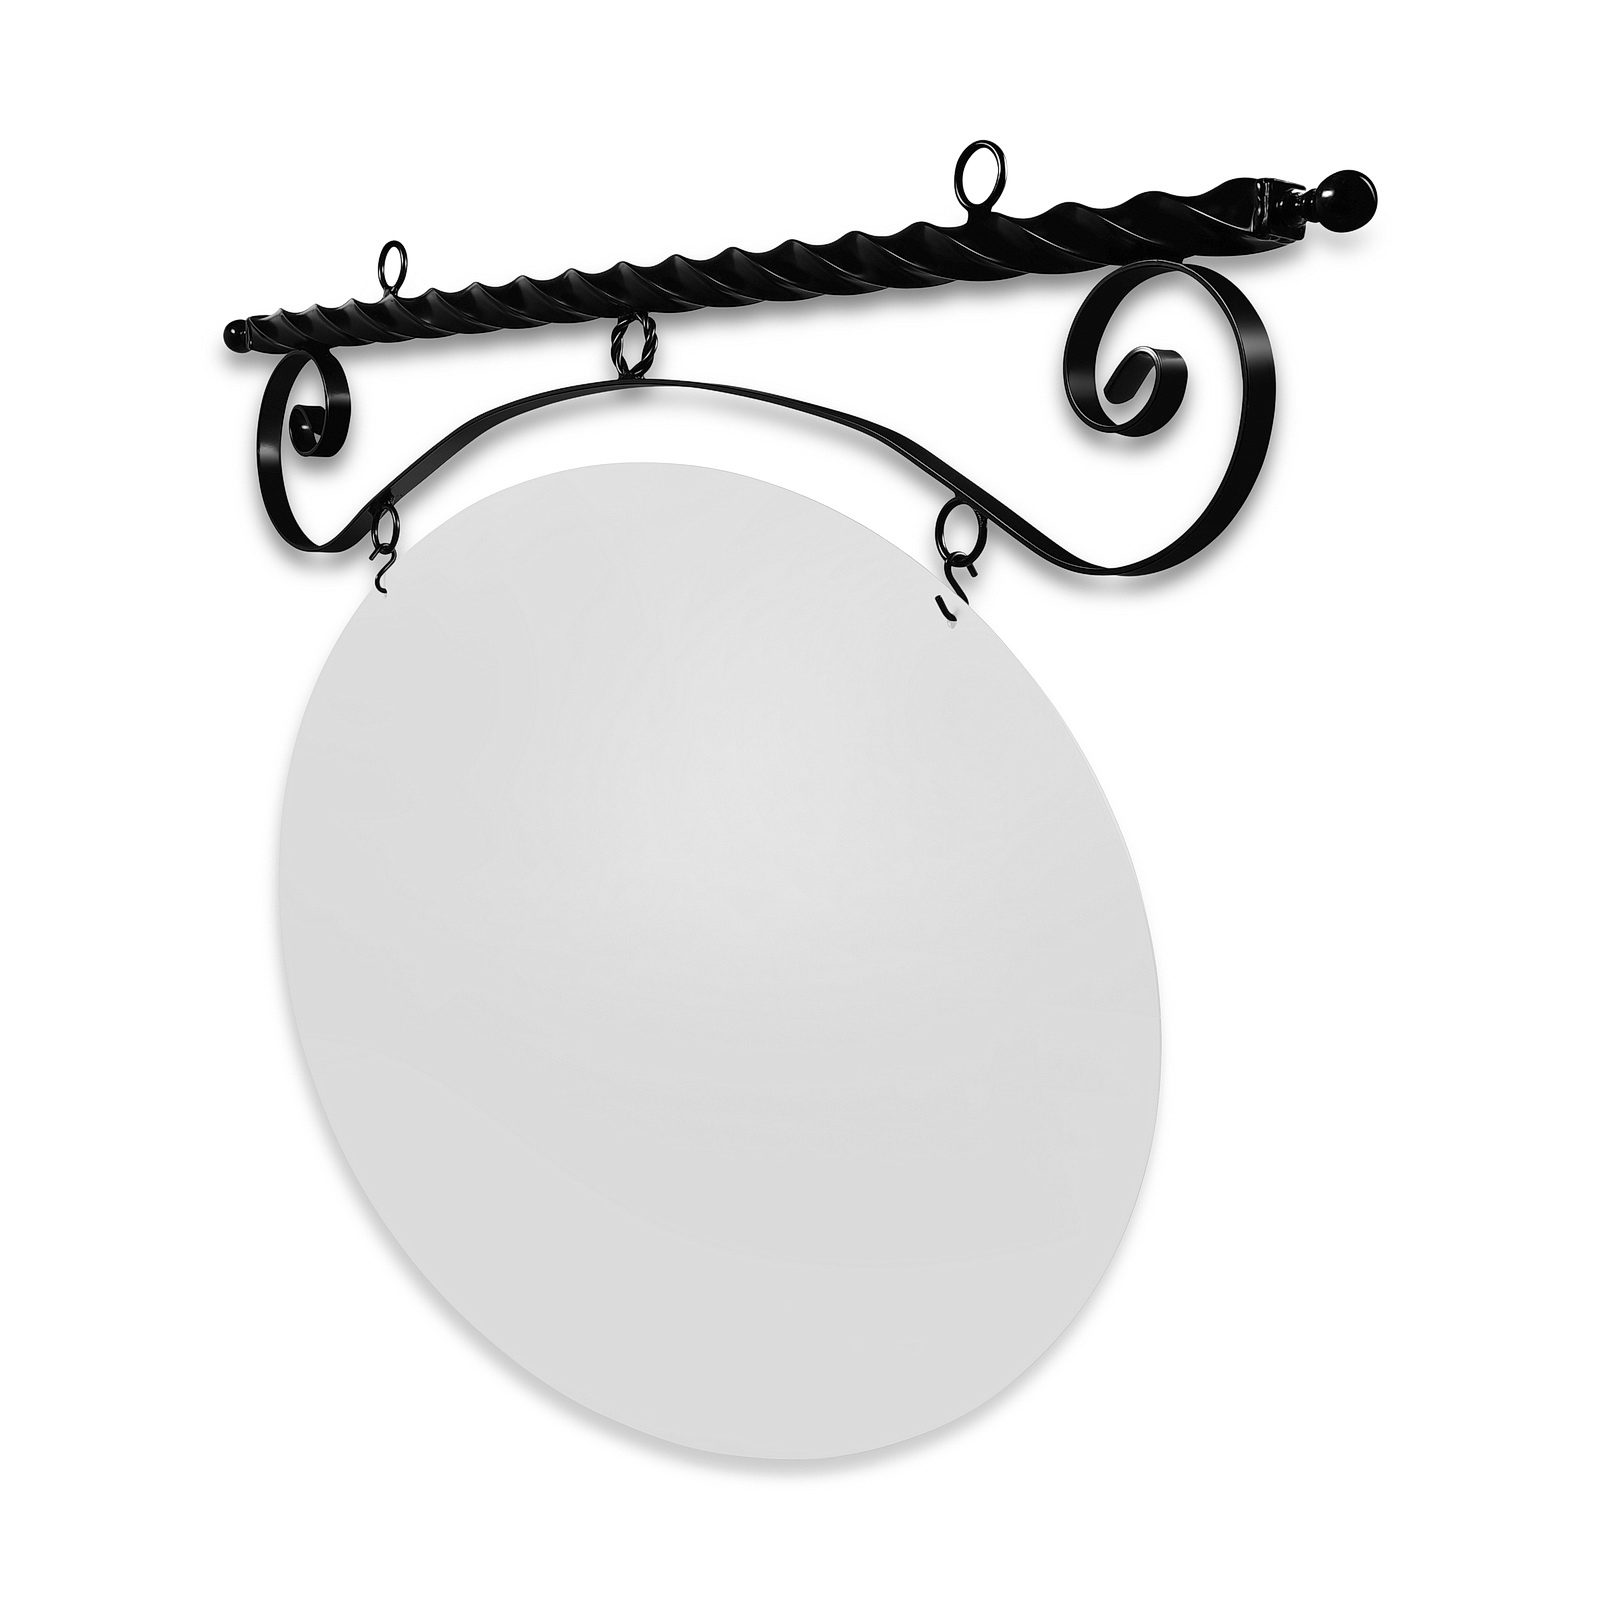 48'' Wide Ceiling Mount Bracket in  Black Powder Coated Steel with 30'' Tall X 46'' Wide X .080'' Thick White Aluminum Sign Blank and 2 Black Powder Coated S-Hooks (Ball Finial)